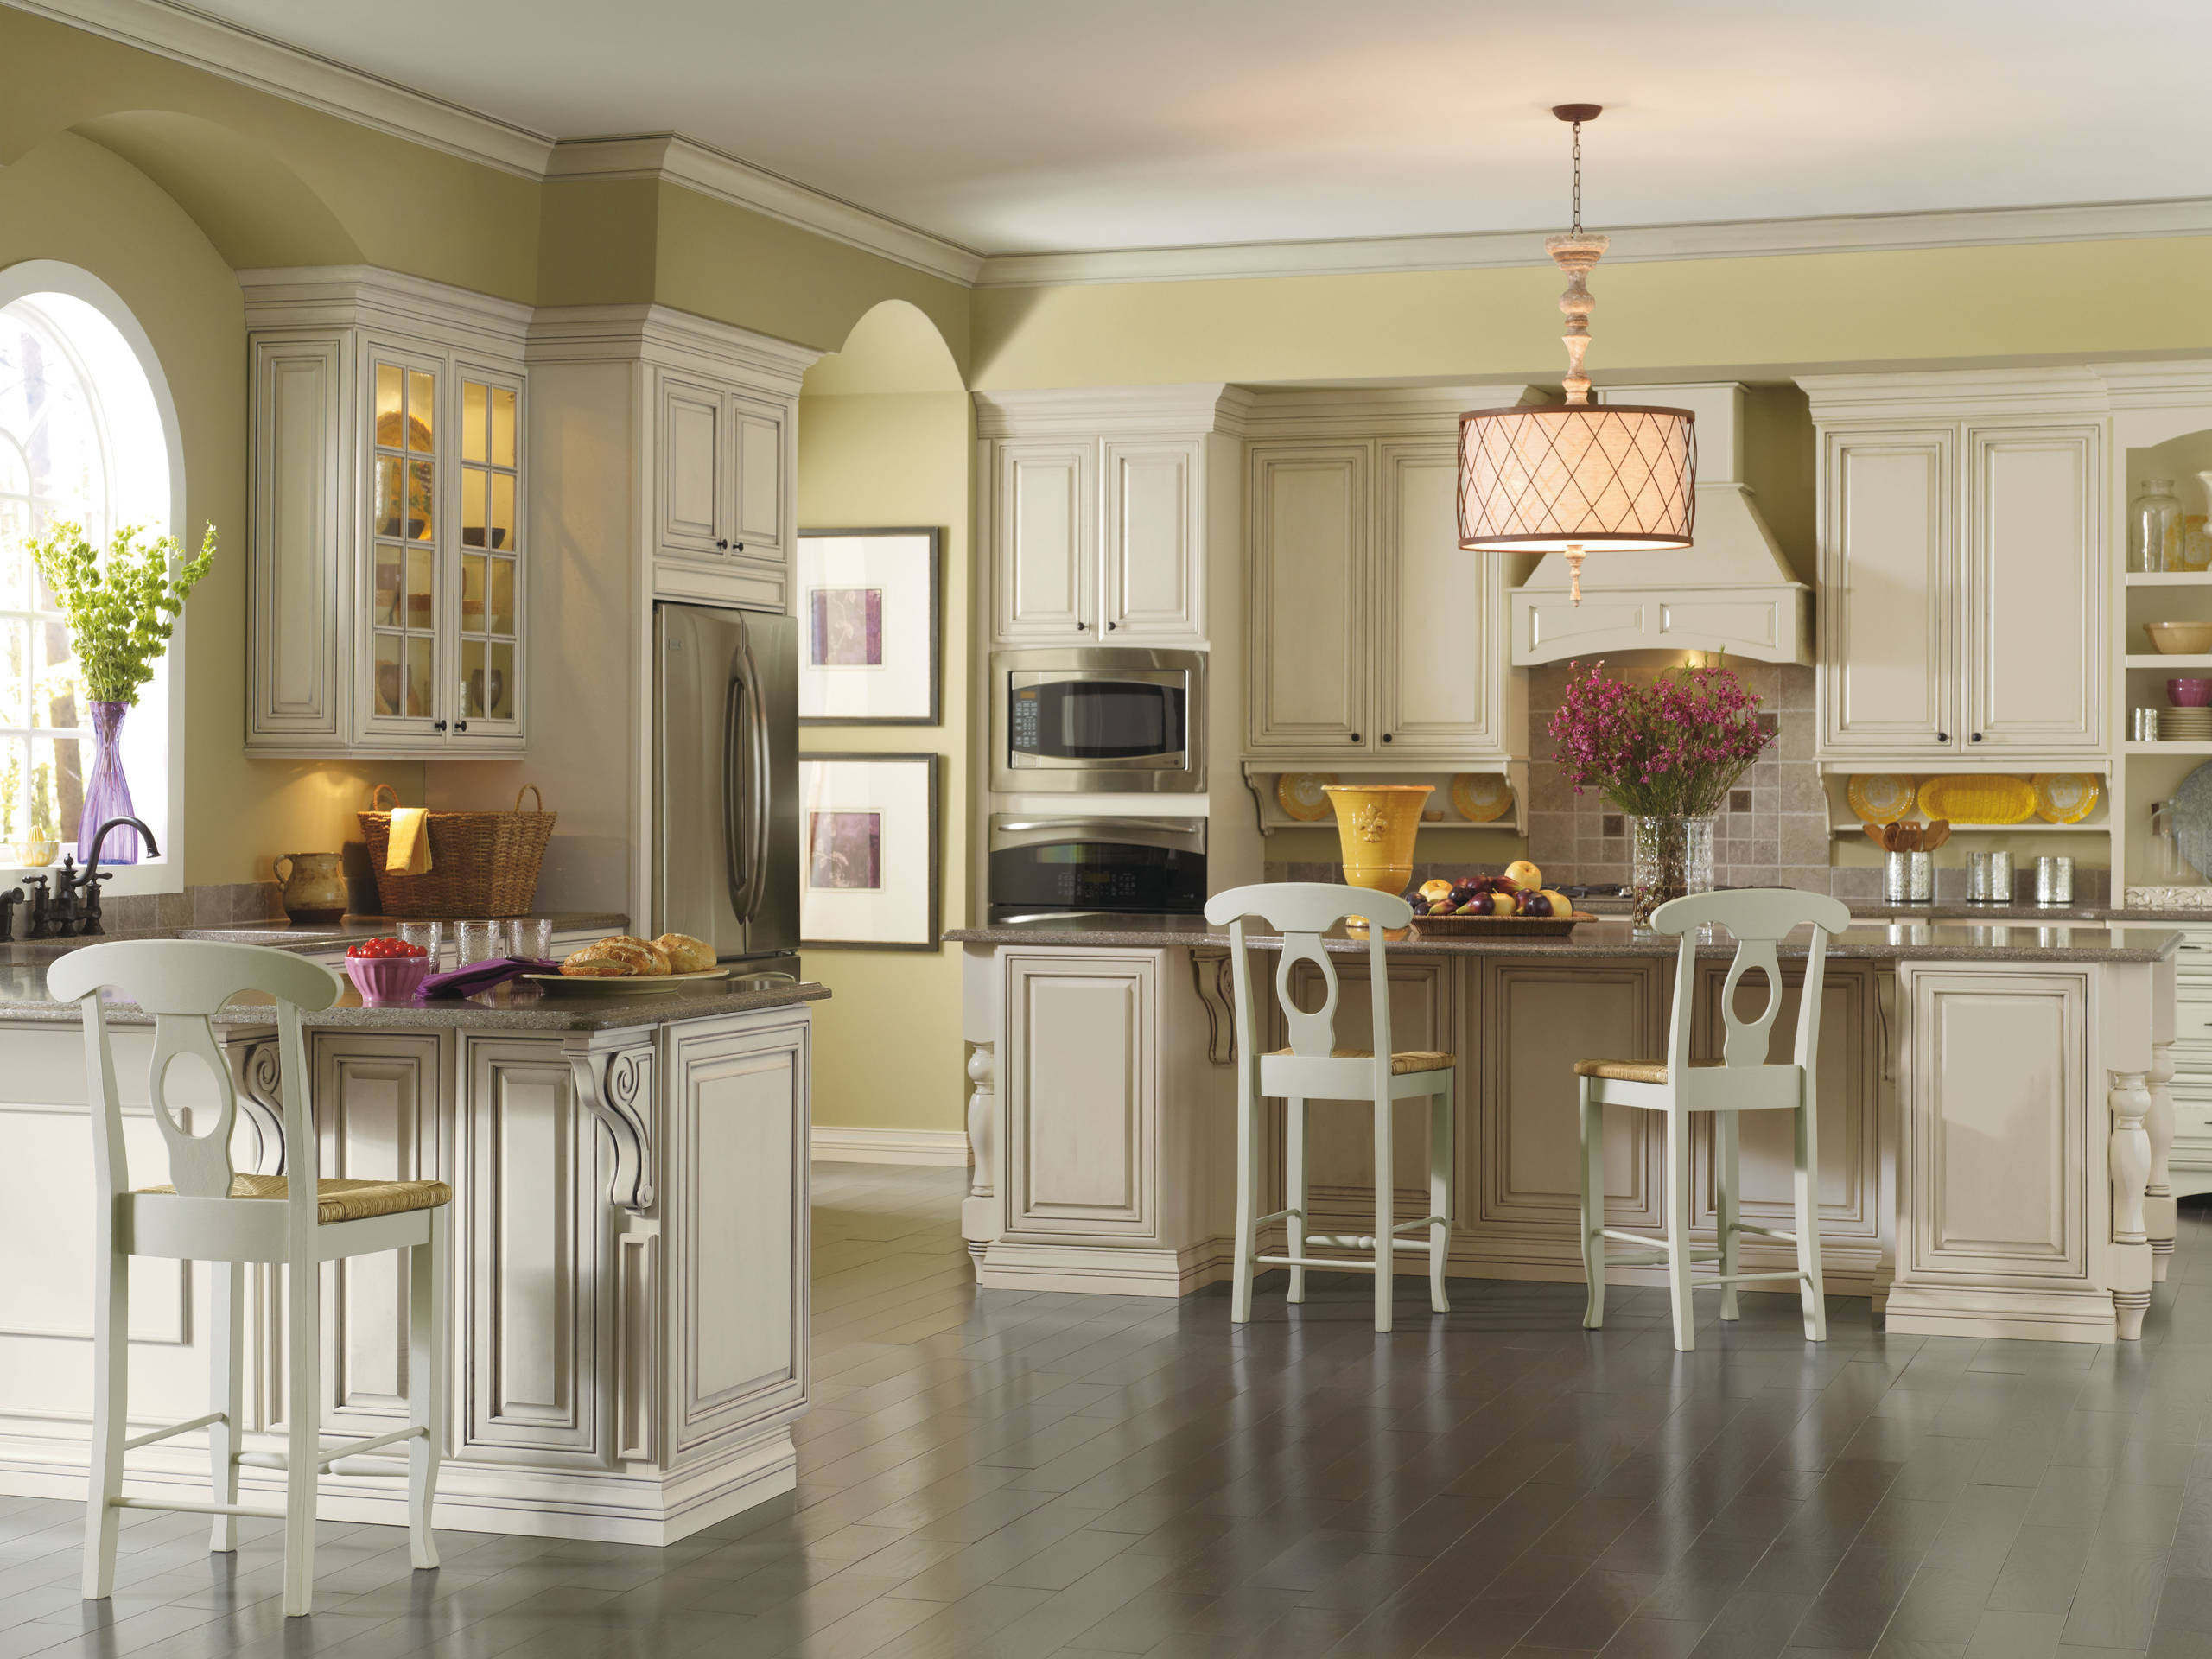 Kemper Kingston Kitchen Cabinets Traditional Kitchen Other By Masterbrand Cabinets Inc Houzz